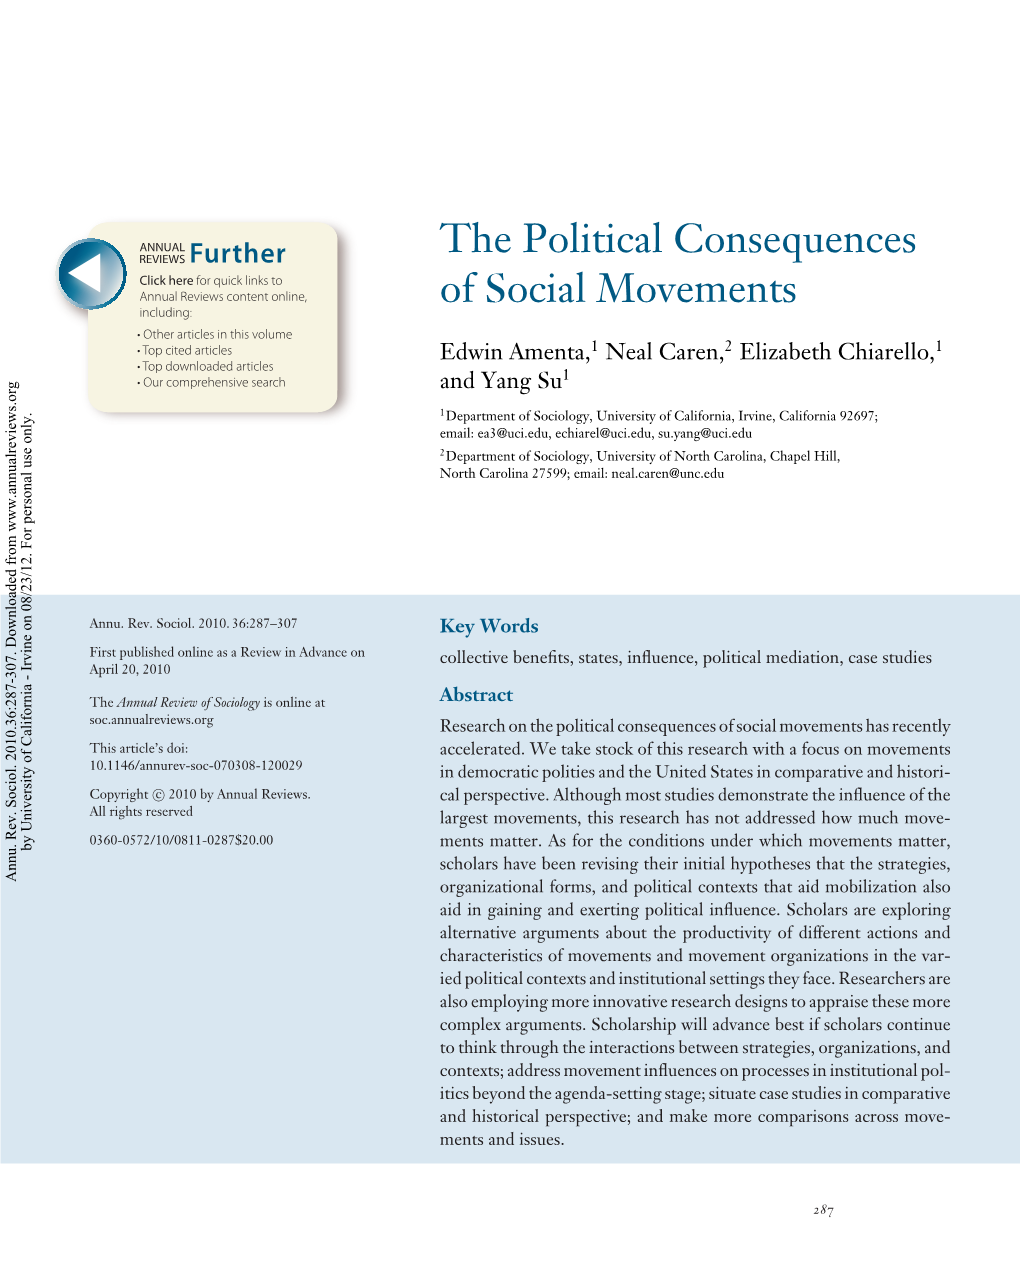 The Political Consequences of Social Movements